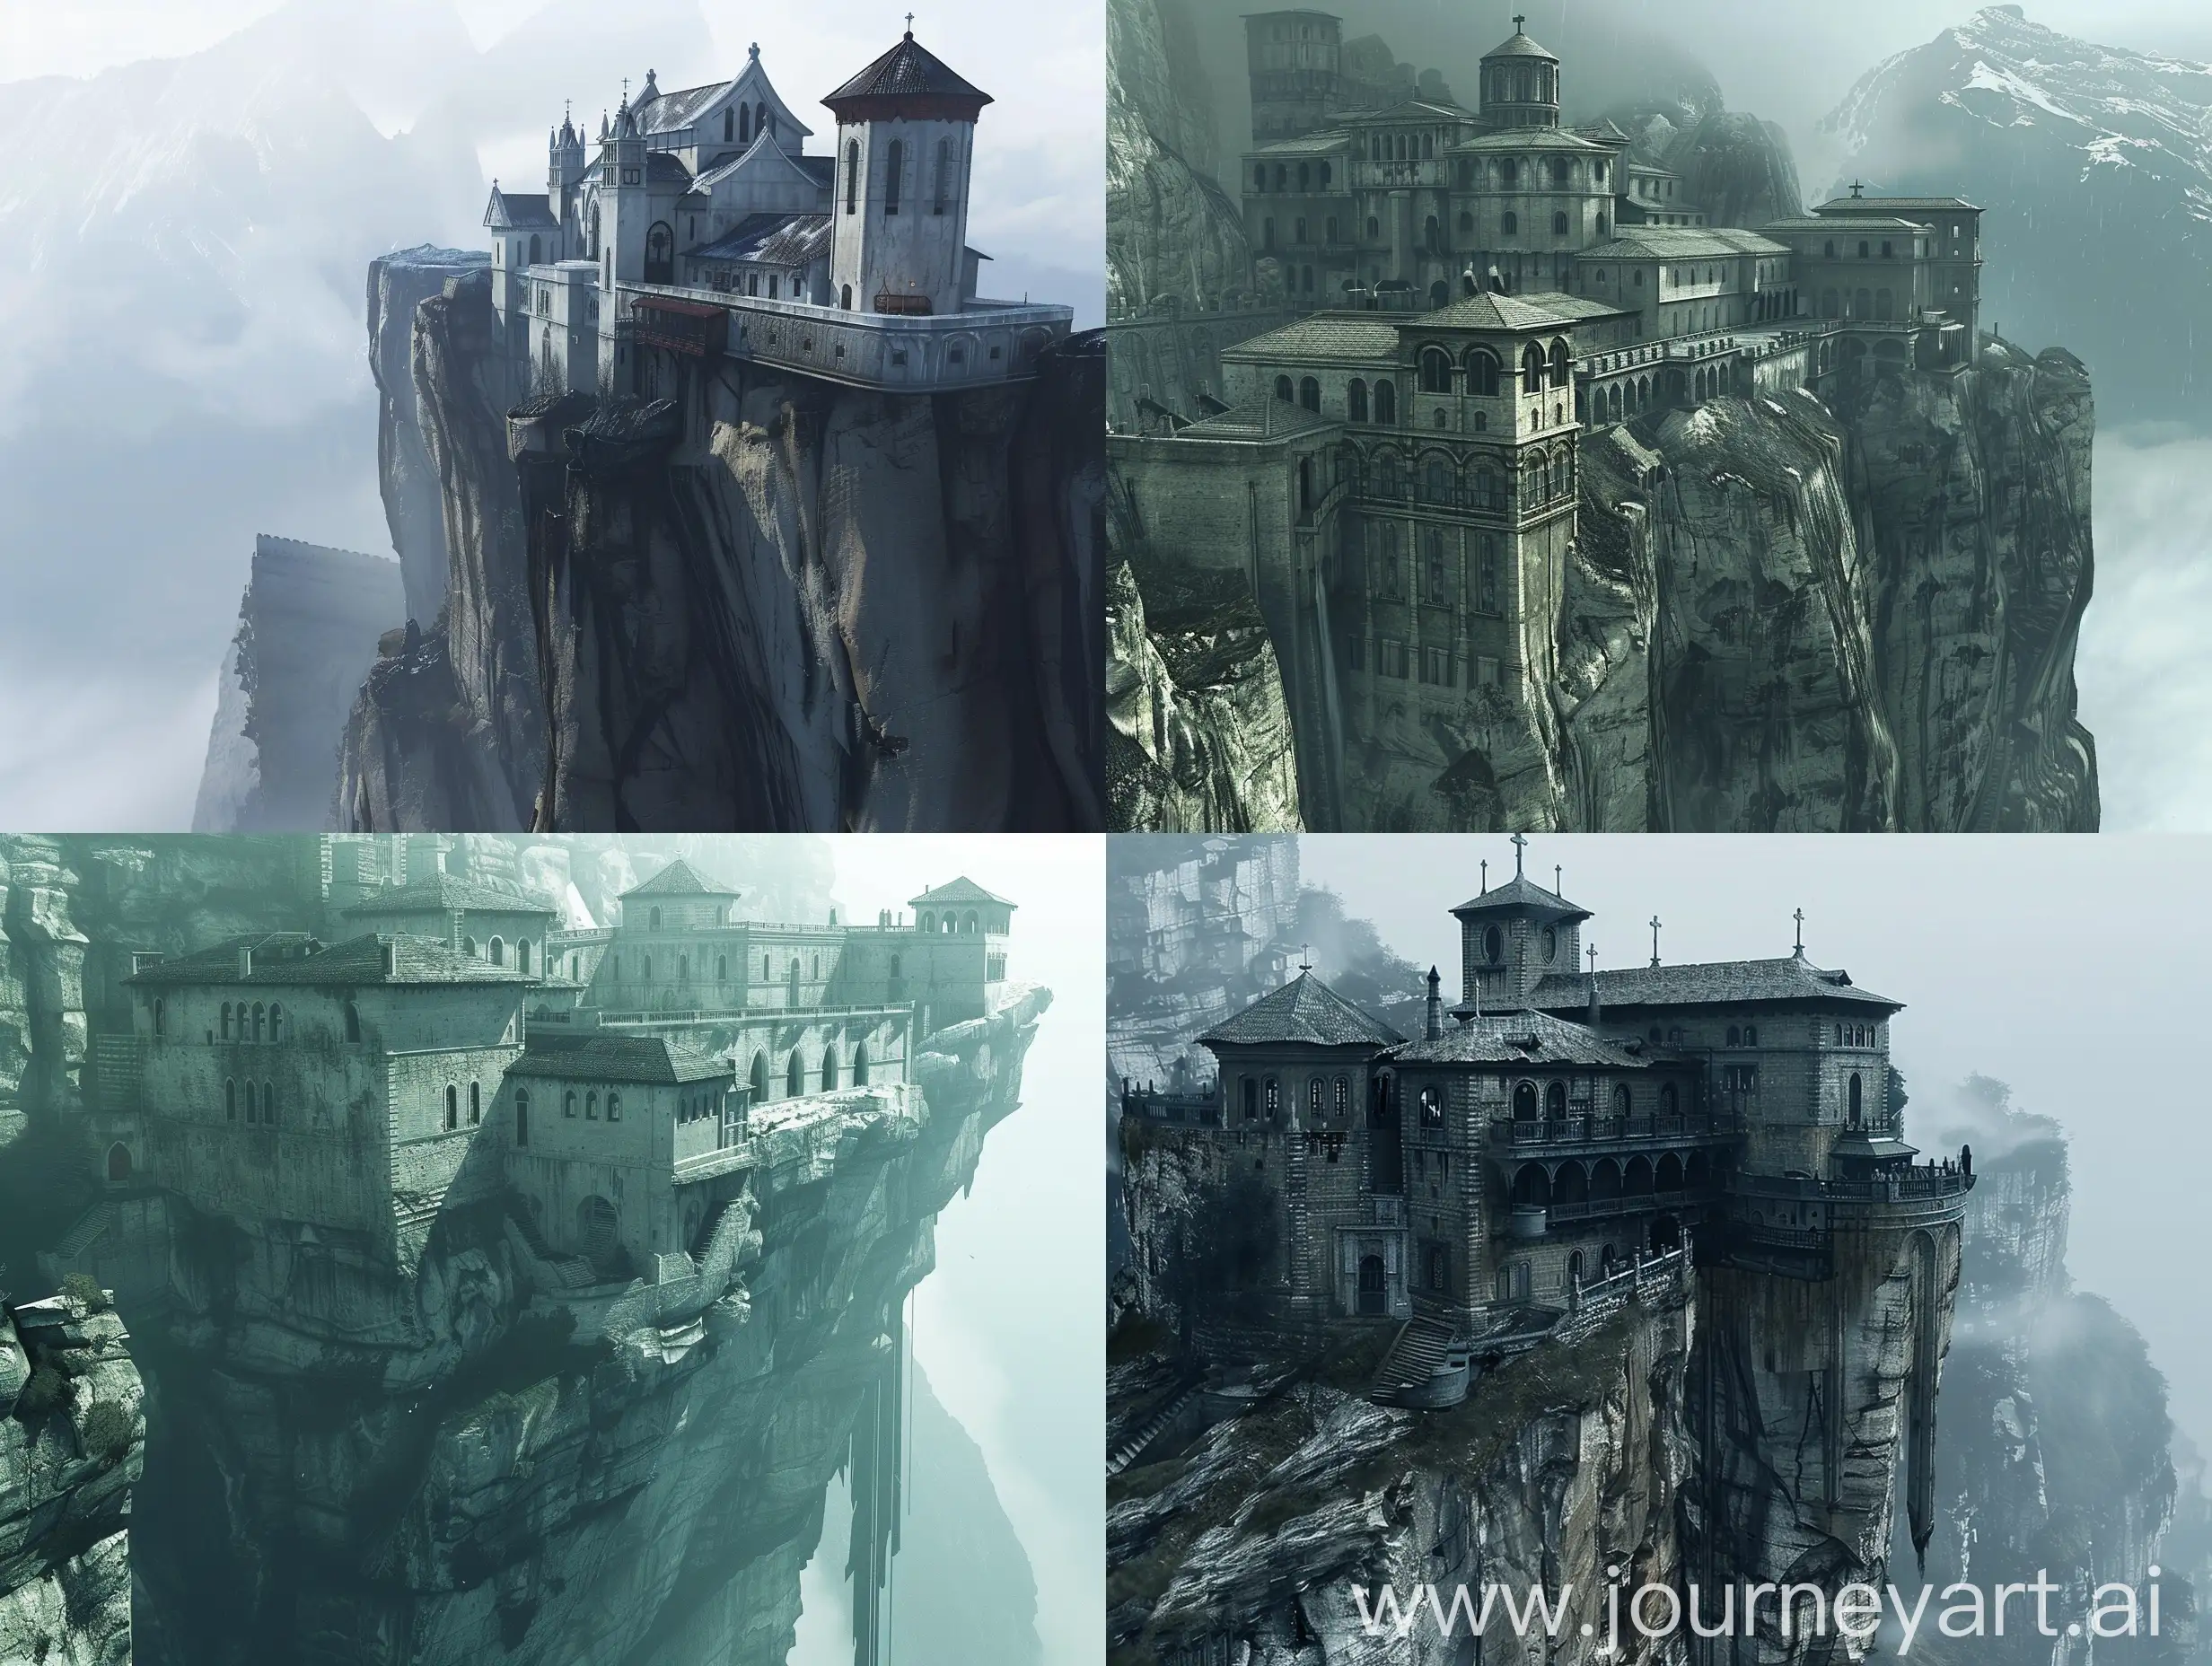 Eerie-Monastery-Perched-on-High-Cliff-in-Painkiller-Heavens-Got-a-Hitman-Game